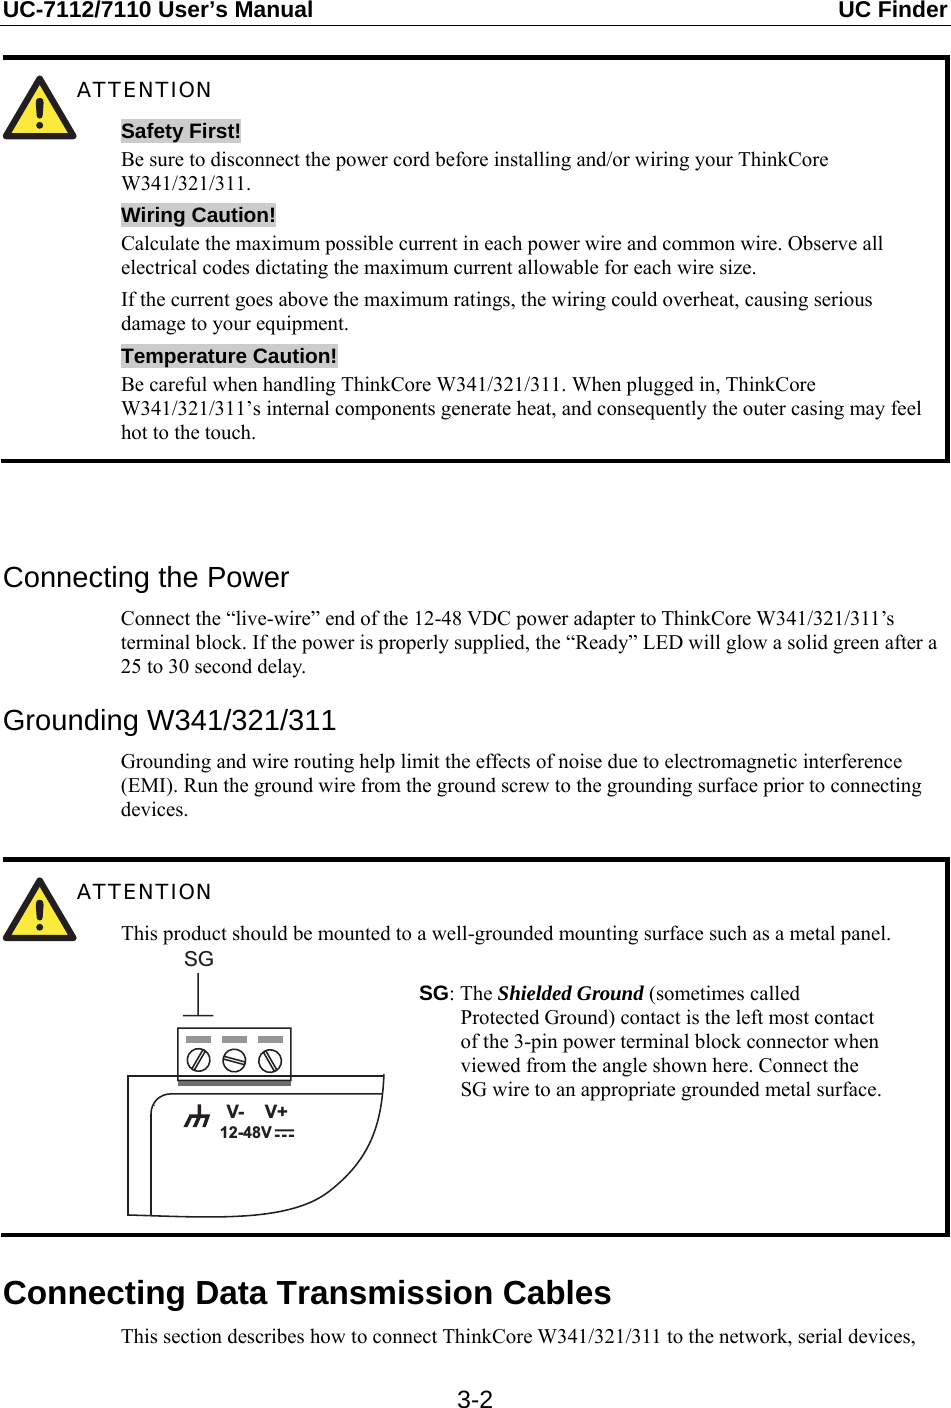 UC-7112/7110 User’s Manual  UC Finder   3-2 ATTENTION Safety First! Be sure to disconnect the power cord before installing and/or wiring your ThinkCore W341/321/311. Wiring Caution! Calculate the maximum possible current in each power wire and common wire. Observe all electrical codes dictating the maximum current allowable for each wire size. If the current goes above the maximum ratings, the wiring could overheat, causing serious damage to your equipment. Temperature Caution! Be careful when handling ThinkCore W341/321/311. When plugged in, ThinkCore W341/321/311’s internal components generate heat, and consequently the outer casing may feel hot to the touch.    Connecting the Power Connect the “live-wire” end of the 12-48 VDC power adapter to ThinkCore W341/321/311’s terminal block. If the power is properly supplied, the “Ready” LED will glow a solid green after a 25 to 30 second delay. Grounding W341/321/311 Grounding and wire routing help limit the effects of noise due to electromagnetic interference (EMI). Run the ground wire from the ground screw to the grounding surface prior to connecting devices.   ATTENTION This product should be mounted to a well-grounded mounting surface such as a metal panel. V+V-SG12-48V SG: The Shielded Ground (sometimes called Protected Ground) contact is the left most contact of the 3-pin power terminal block connector when viewed from the angle shown here. Connect the SG wire to an appropriate grounded metal surface.  Connecting Data Transmission Cables This section describes how to connect ThinkCore W341/321/311 to the network, serial devices, 